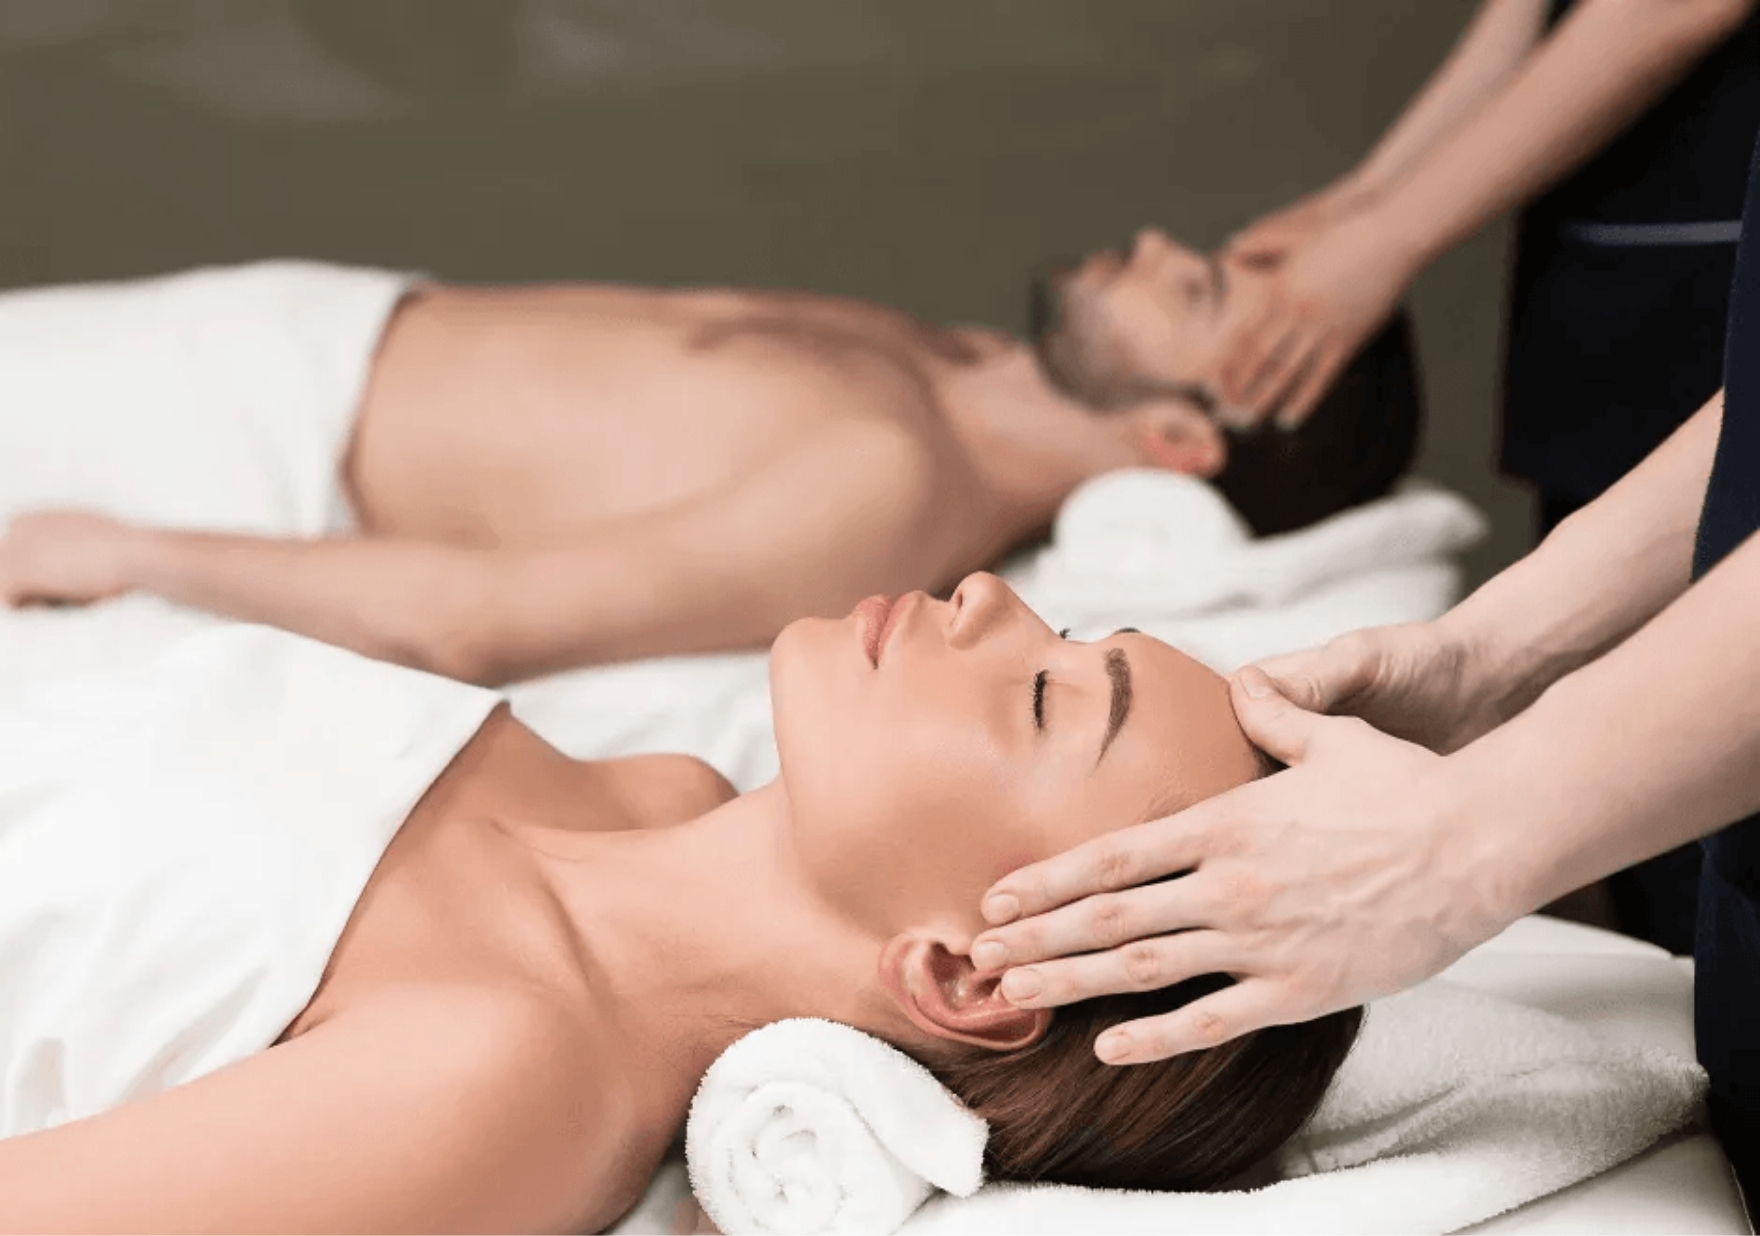 Couples Massage Therapy, expert massage therapy, massage, massage therapy